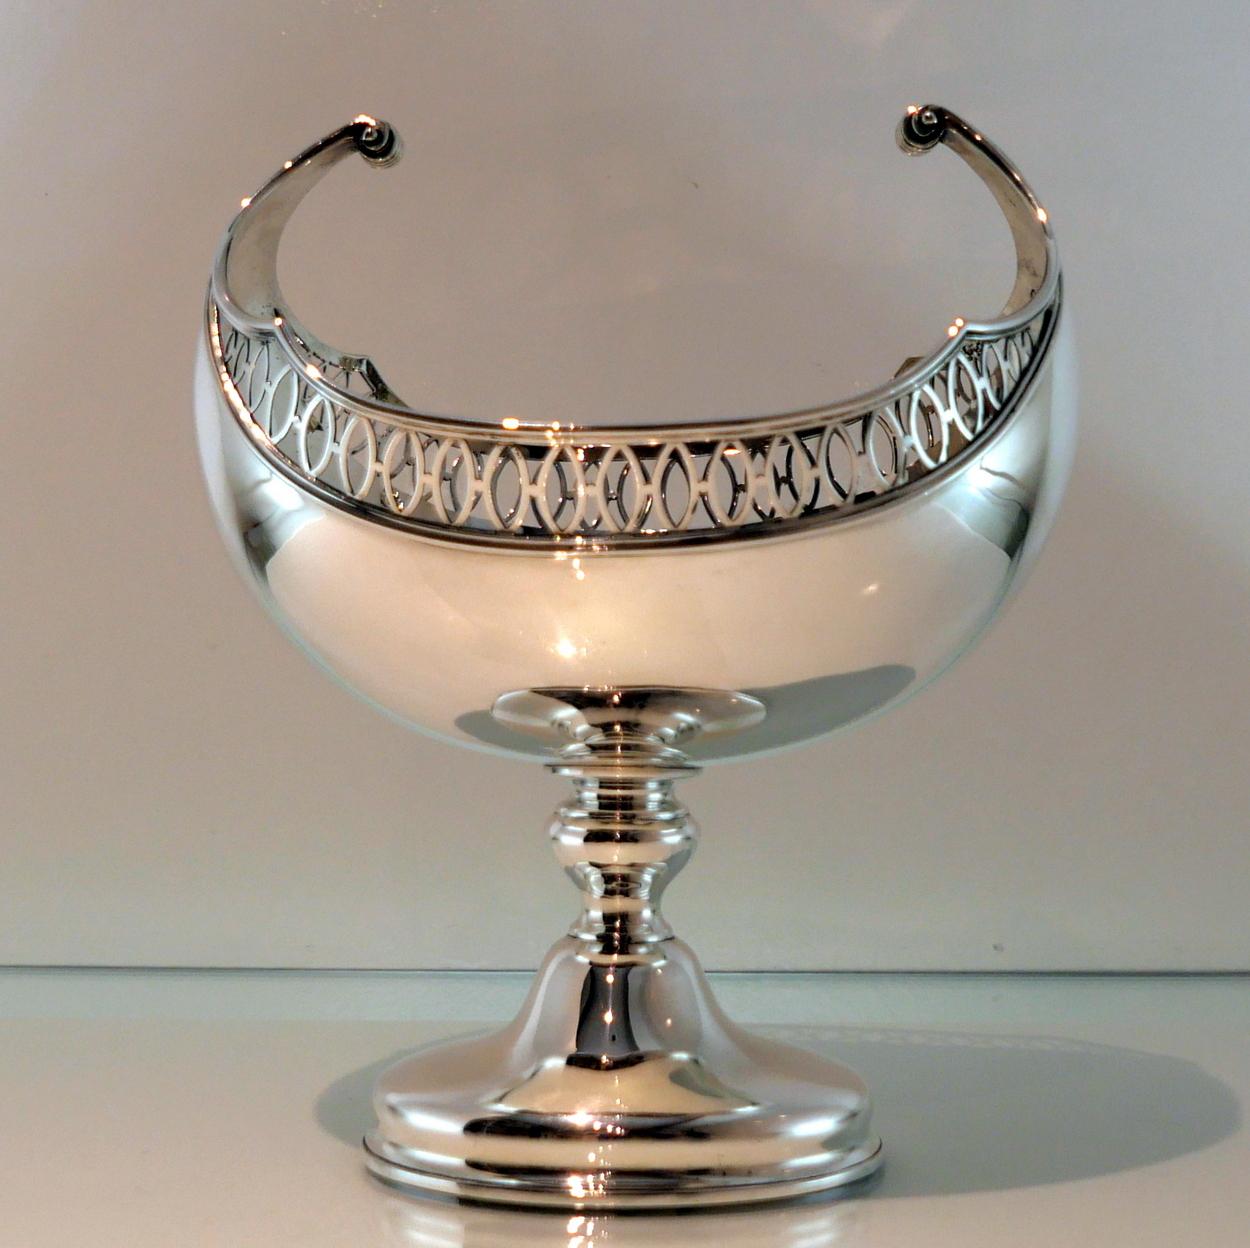 A large beautiful early 20th century silver “boat shaped” sterling silver dish standing on a raised circular pedestal foot. The upper bowl has elegant oval piercing for highlights and stunning “floating handles” for supreme craftsmanship.

